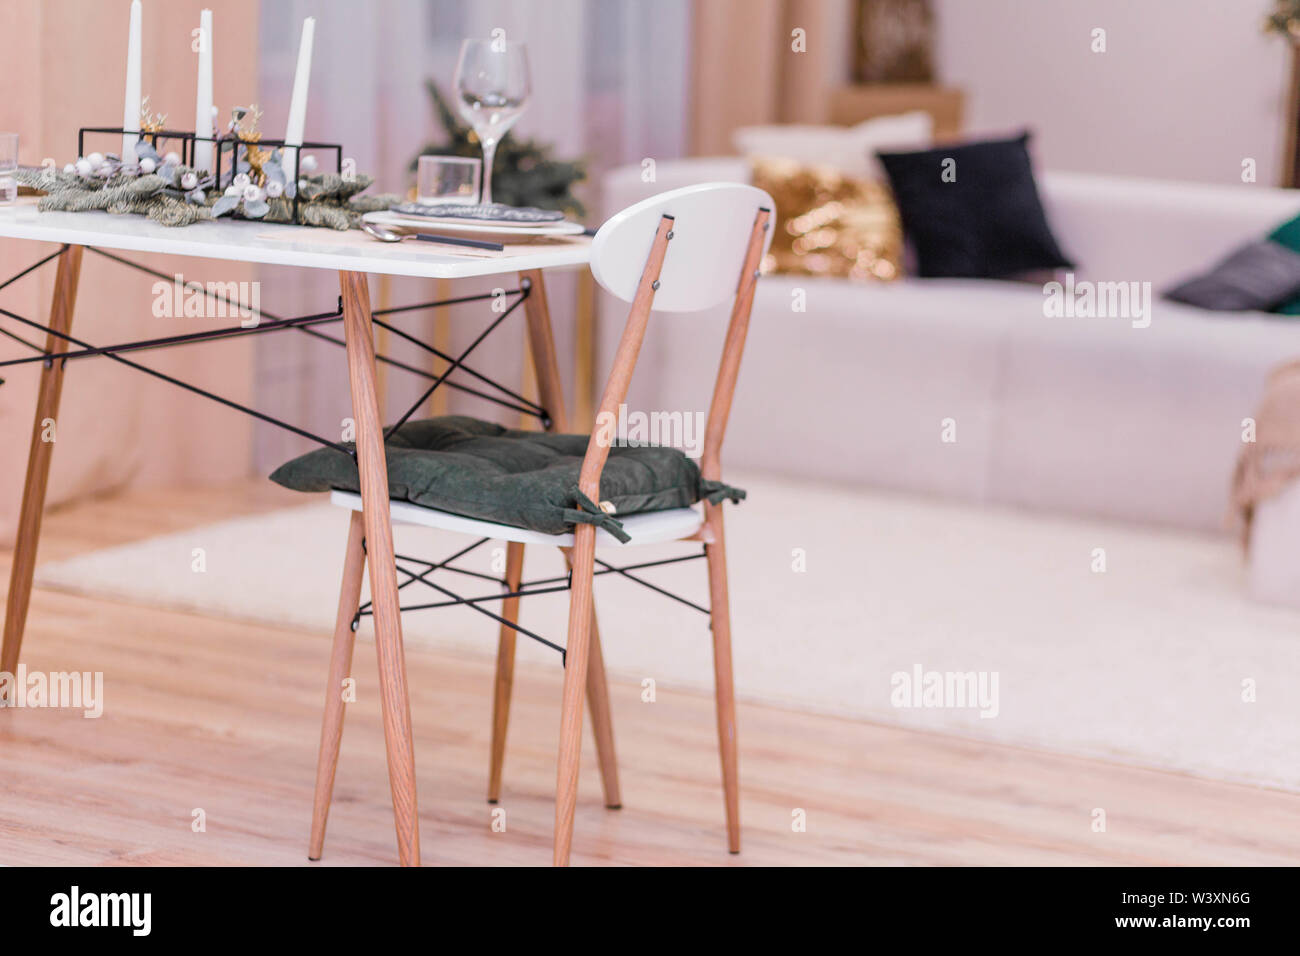 Table setting in the New Year's style. Simple and stylish interior rooms in the New Year's style Stock Photo